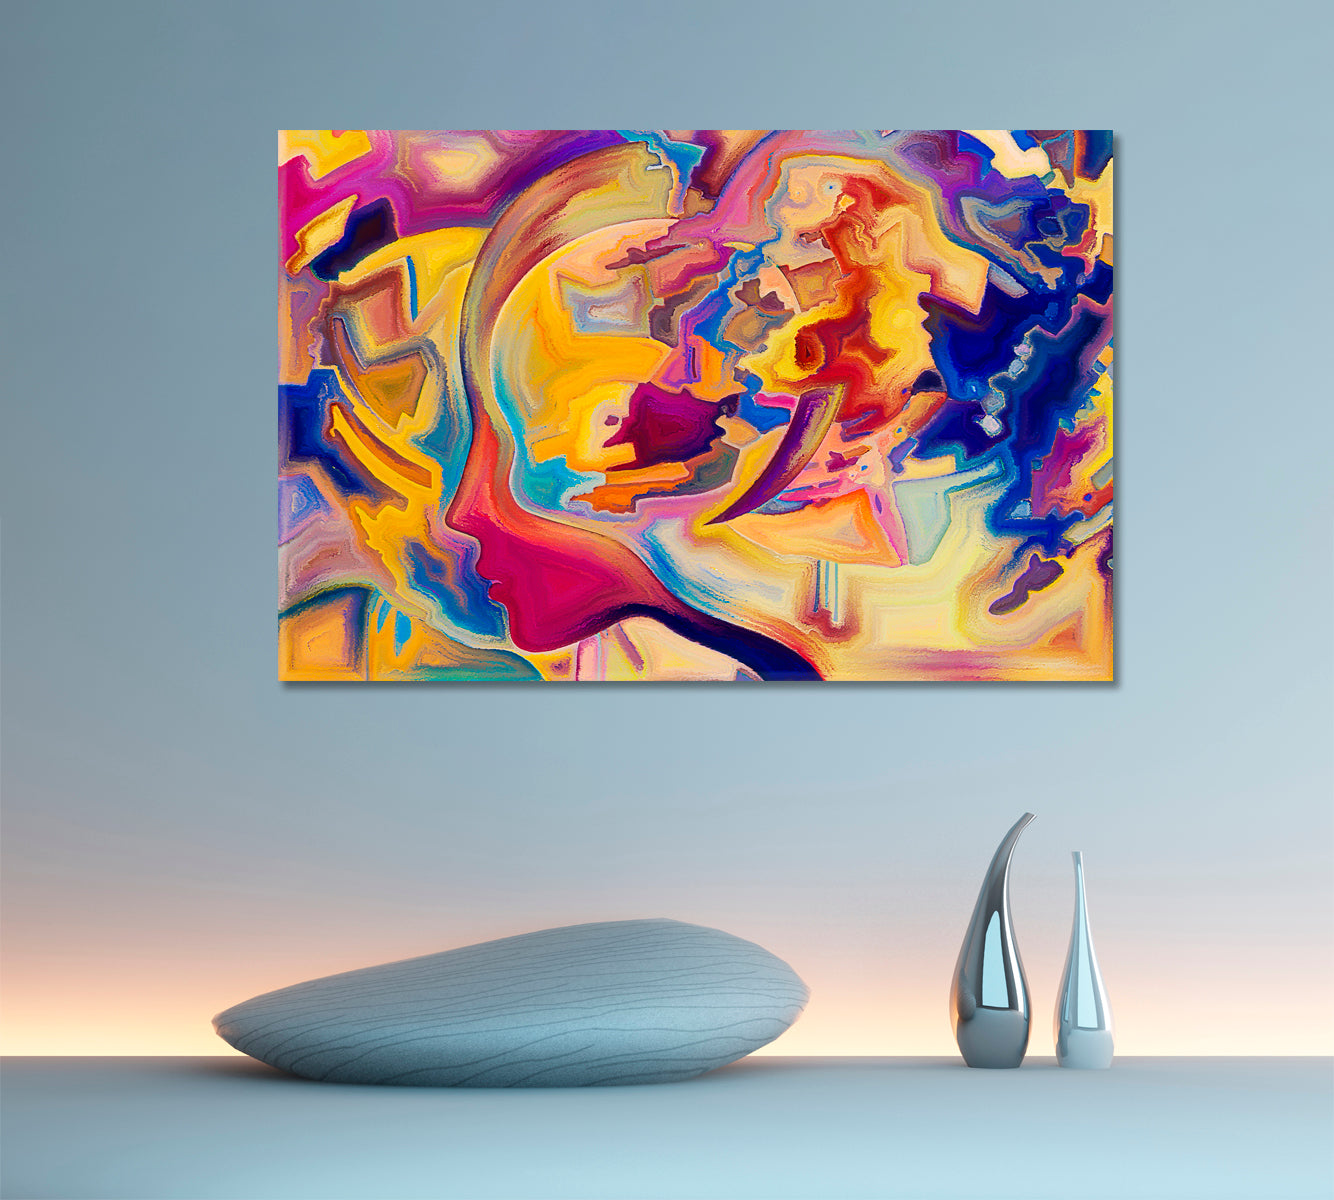 Colors In Us Colorful Elements And Human Profile Abstract Art Print Artesty 1 panel 24" x 16" 